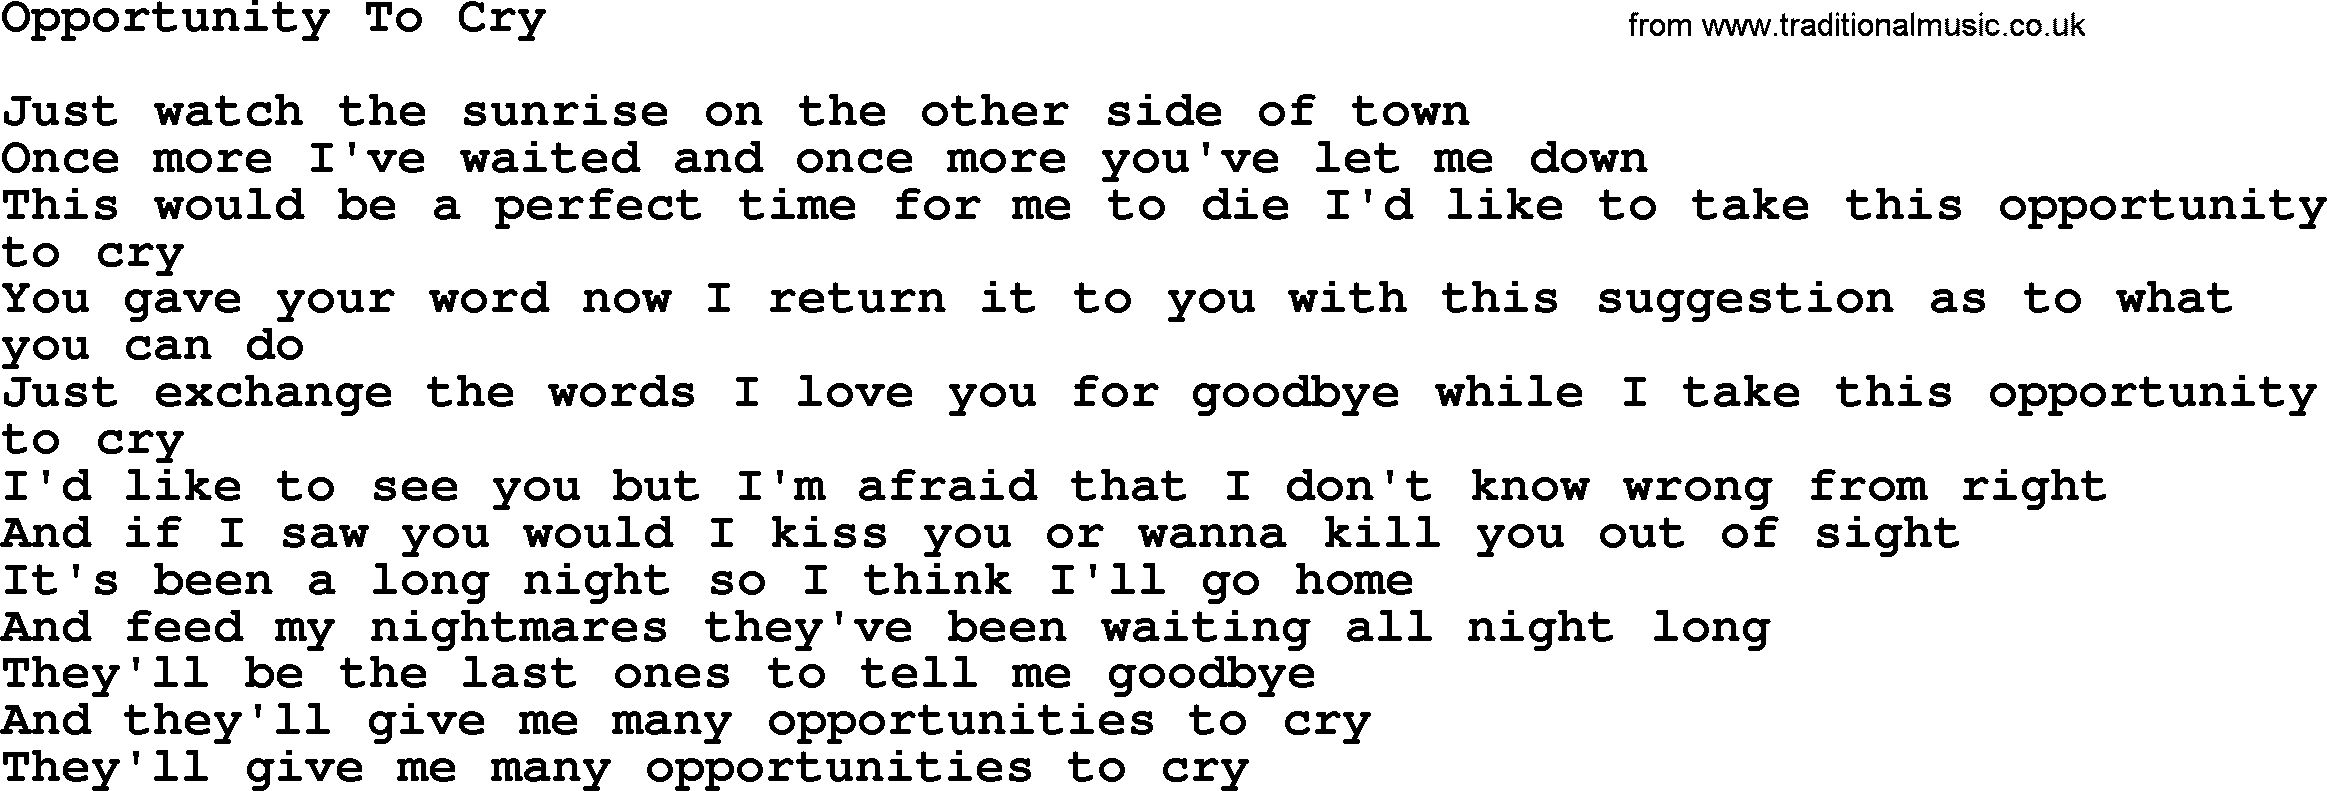 Willie Nelson song: Opportunity To Cry lyrics